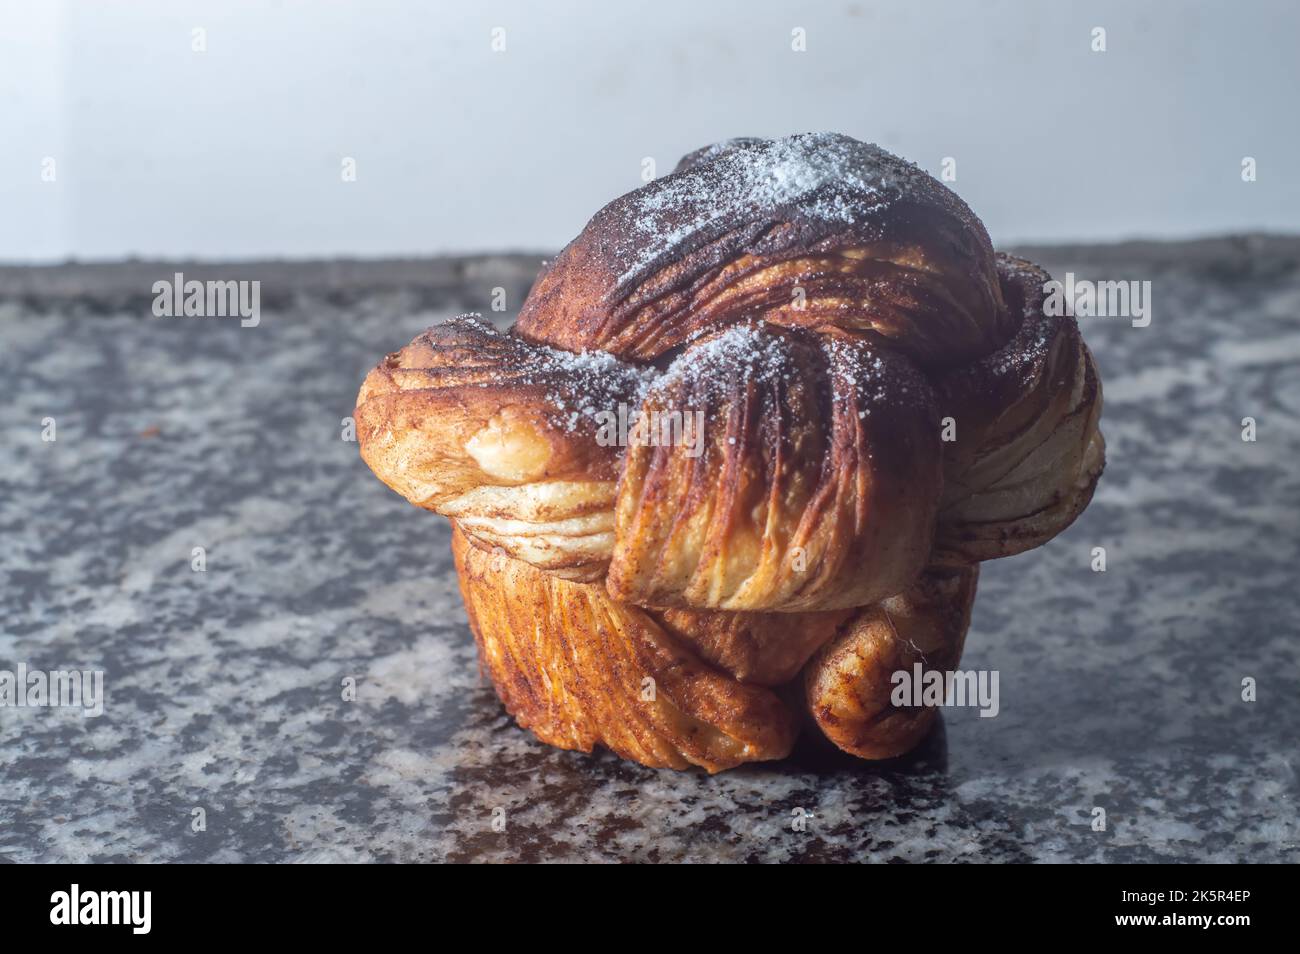 Pastry with sugar dusting on a rustic wood table. Close up with directional lighting for texture detail and copy space for text.. Stock Photo